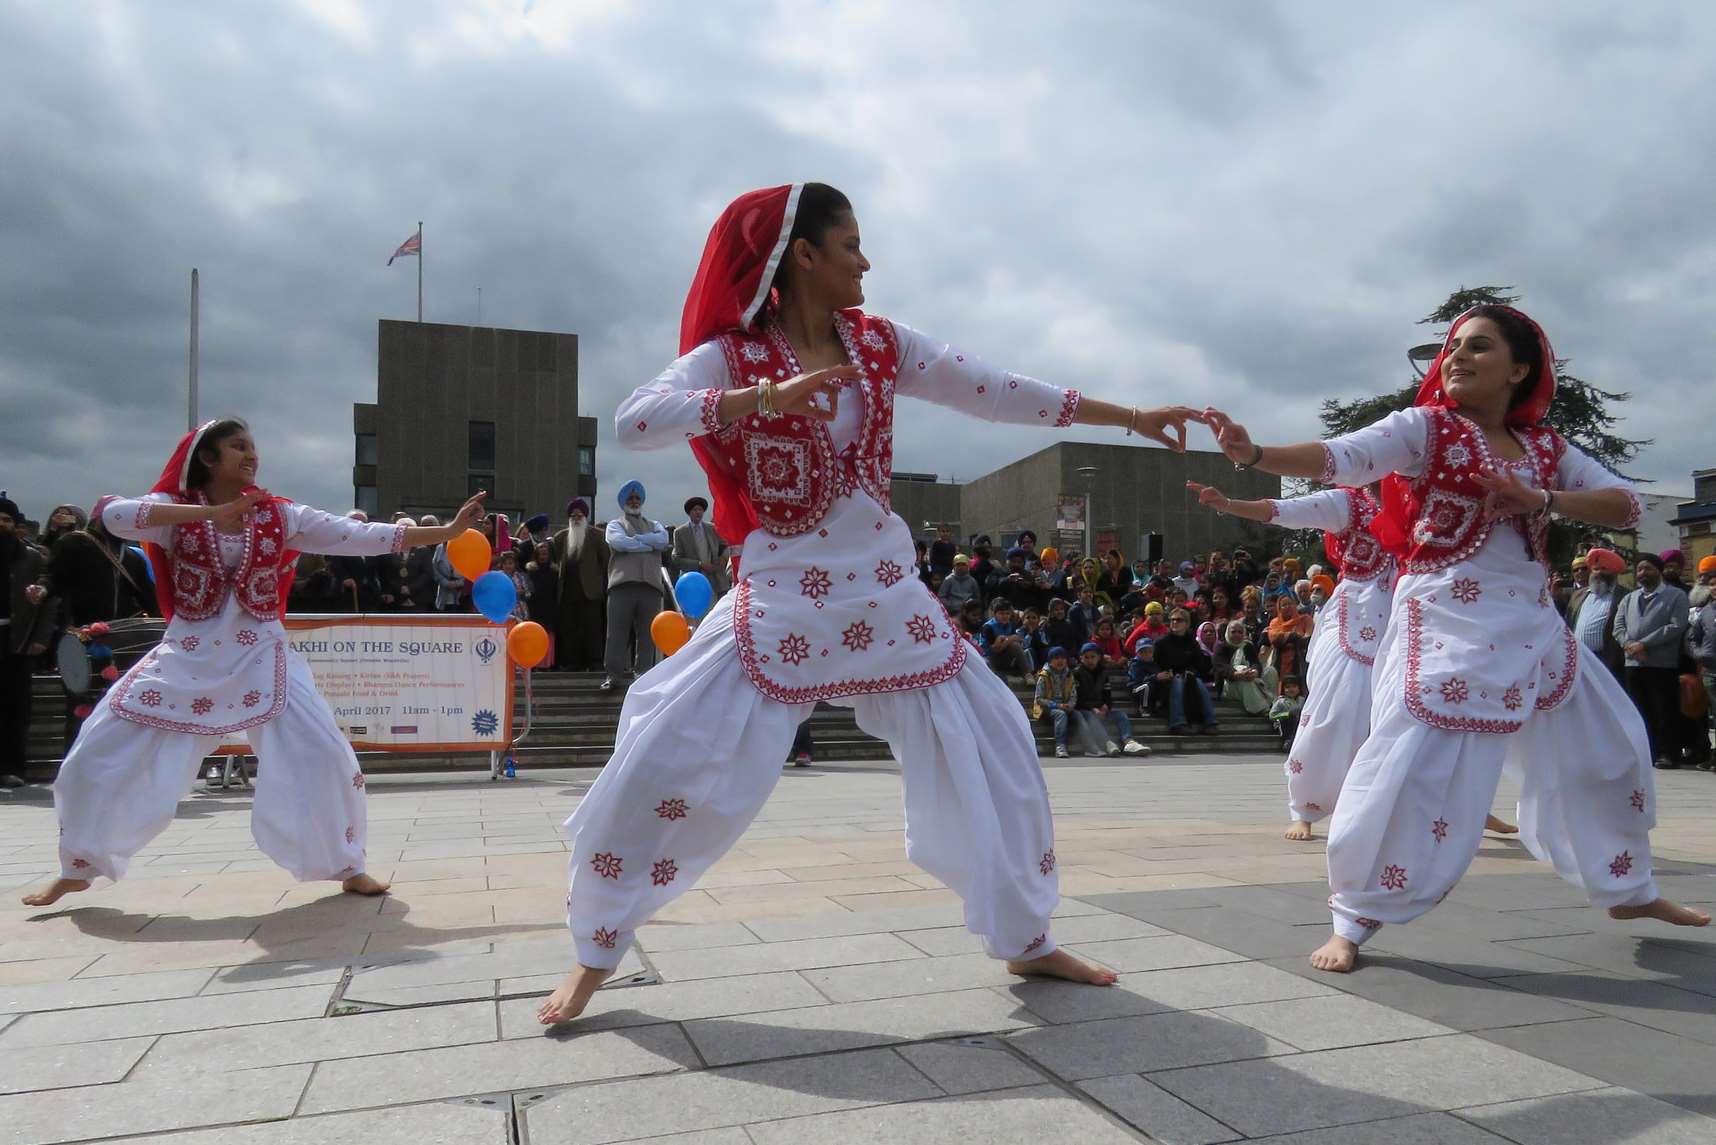 Energetic youngsters danced in the Community Square. Picture: Gravesham Borough Council